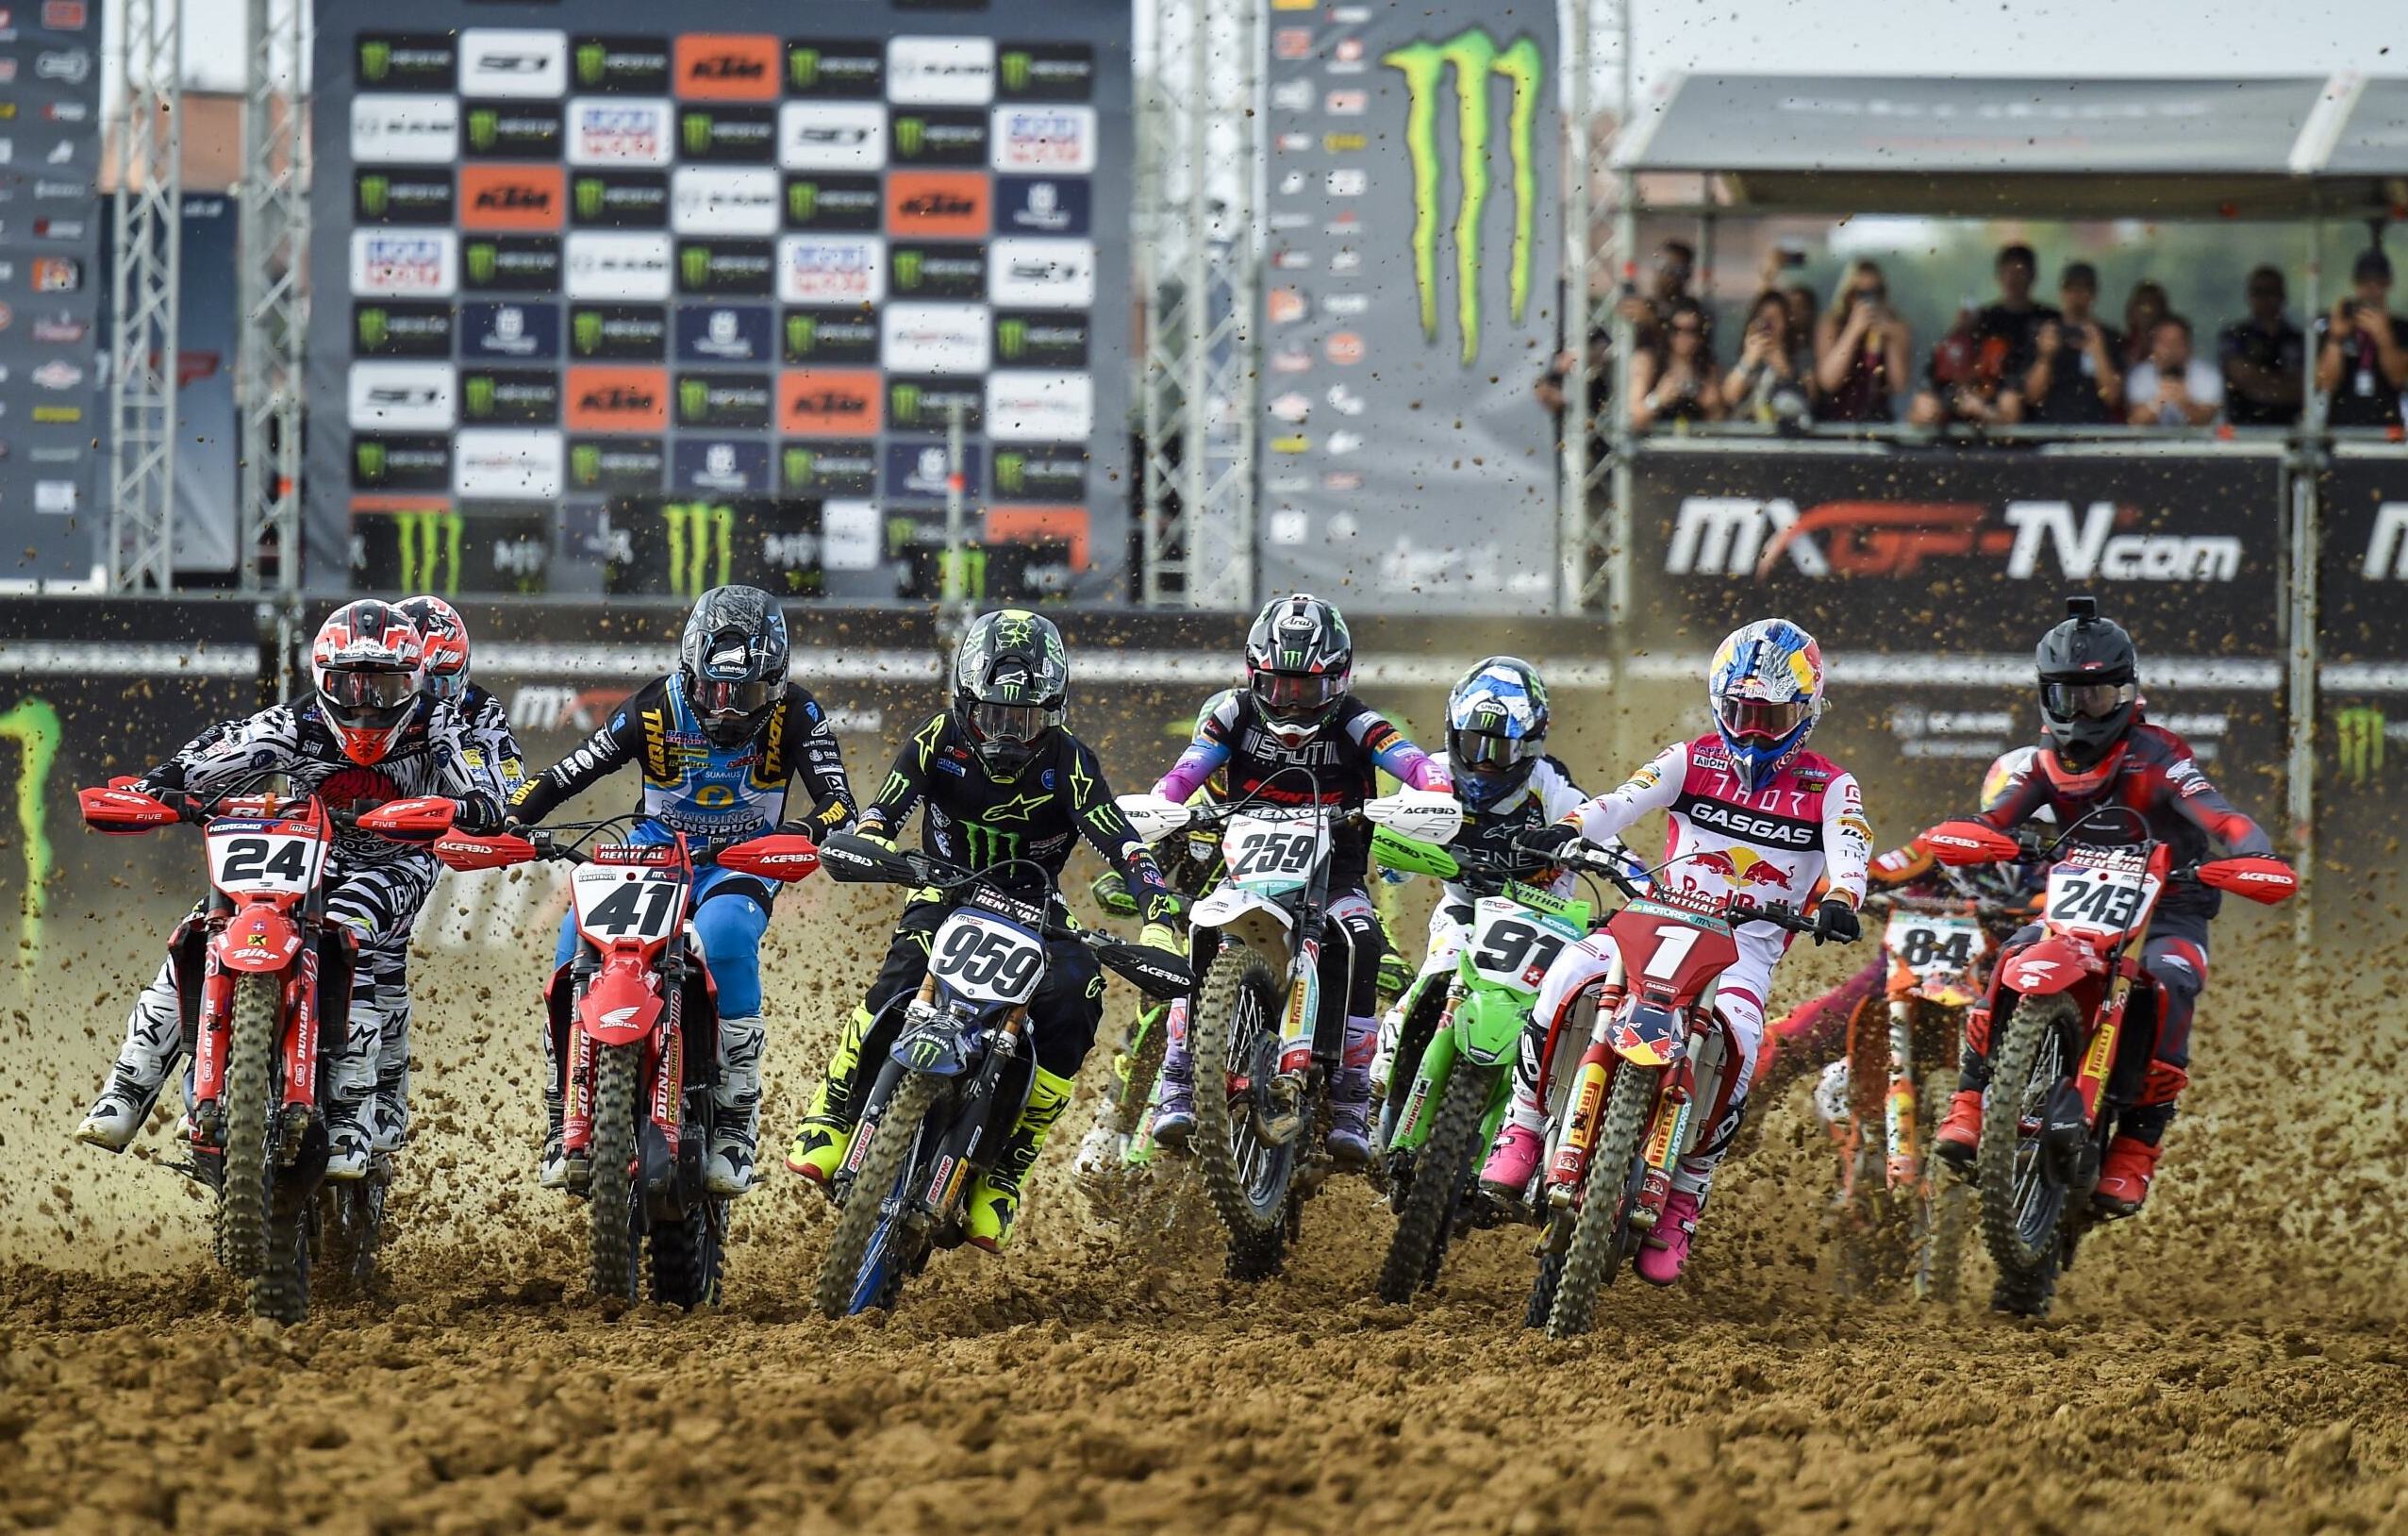 Timetable and Entry List for the MXGP of Galicia